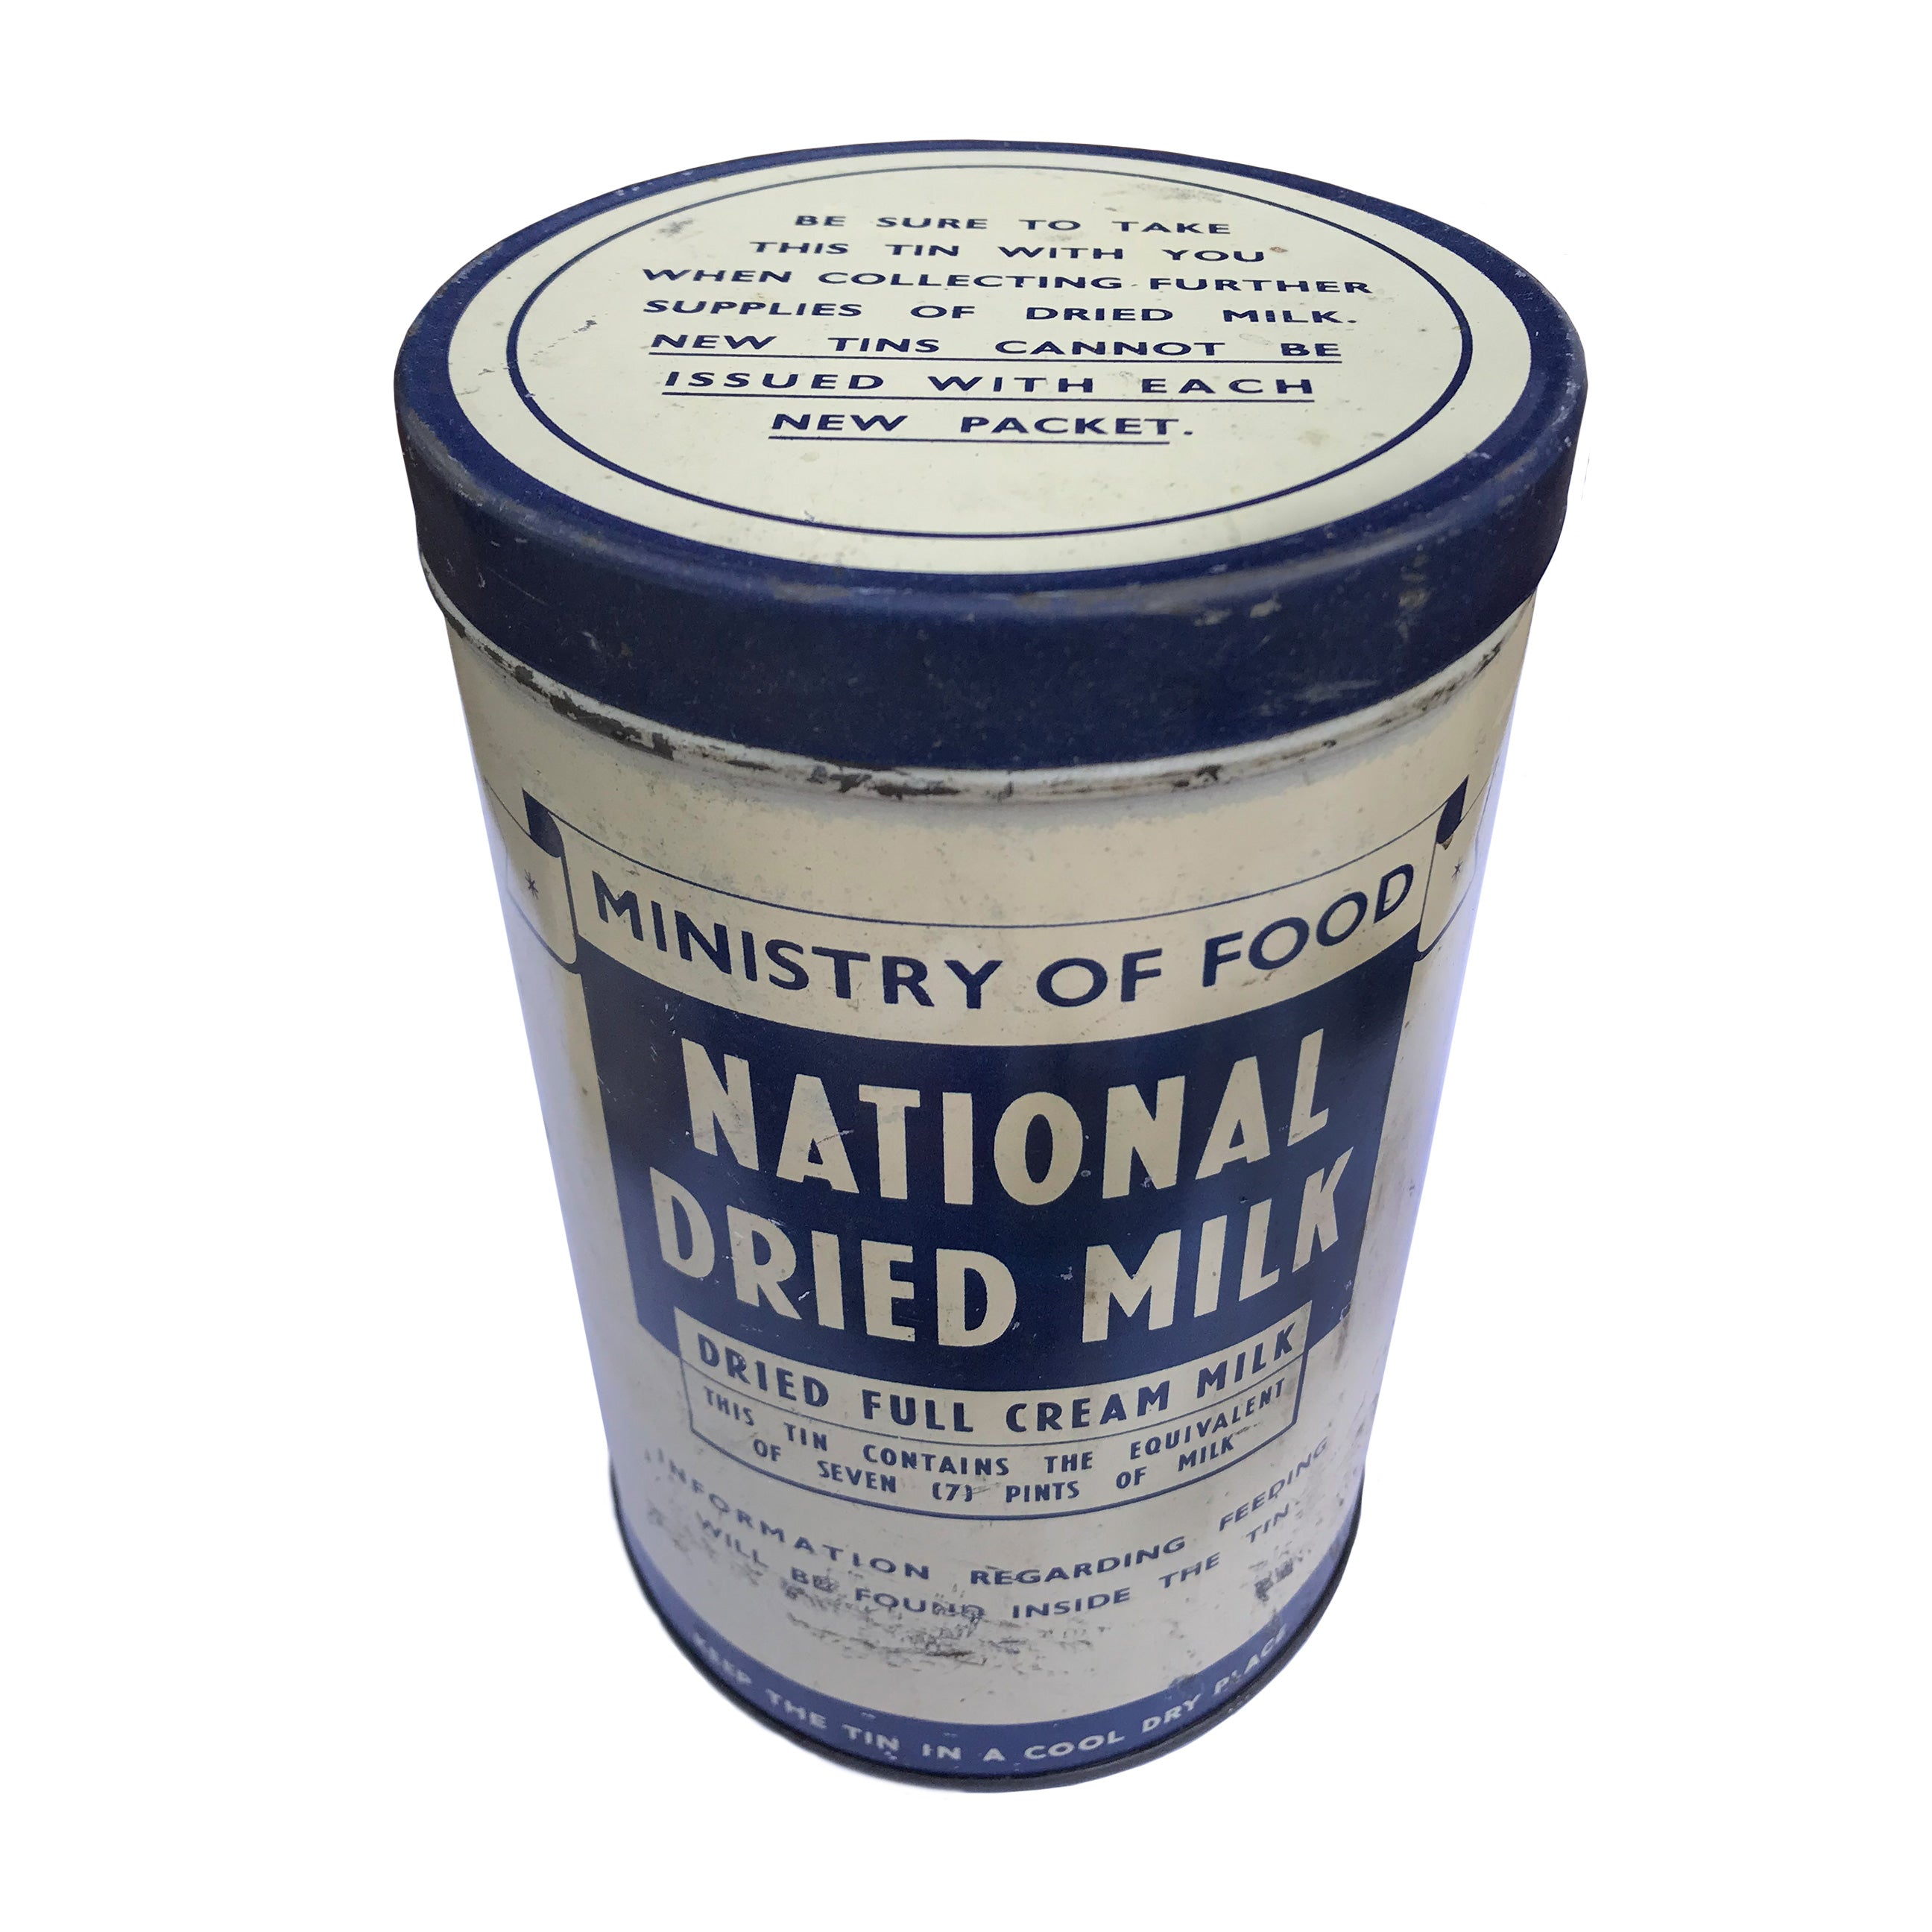 Vintage Ministry of Food Milk Tin. Find this and other Vintage Tins & Toys for sale at Intovintage.co.uk.